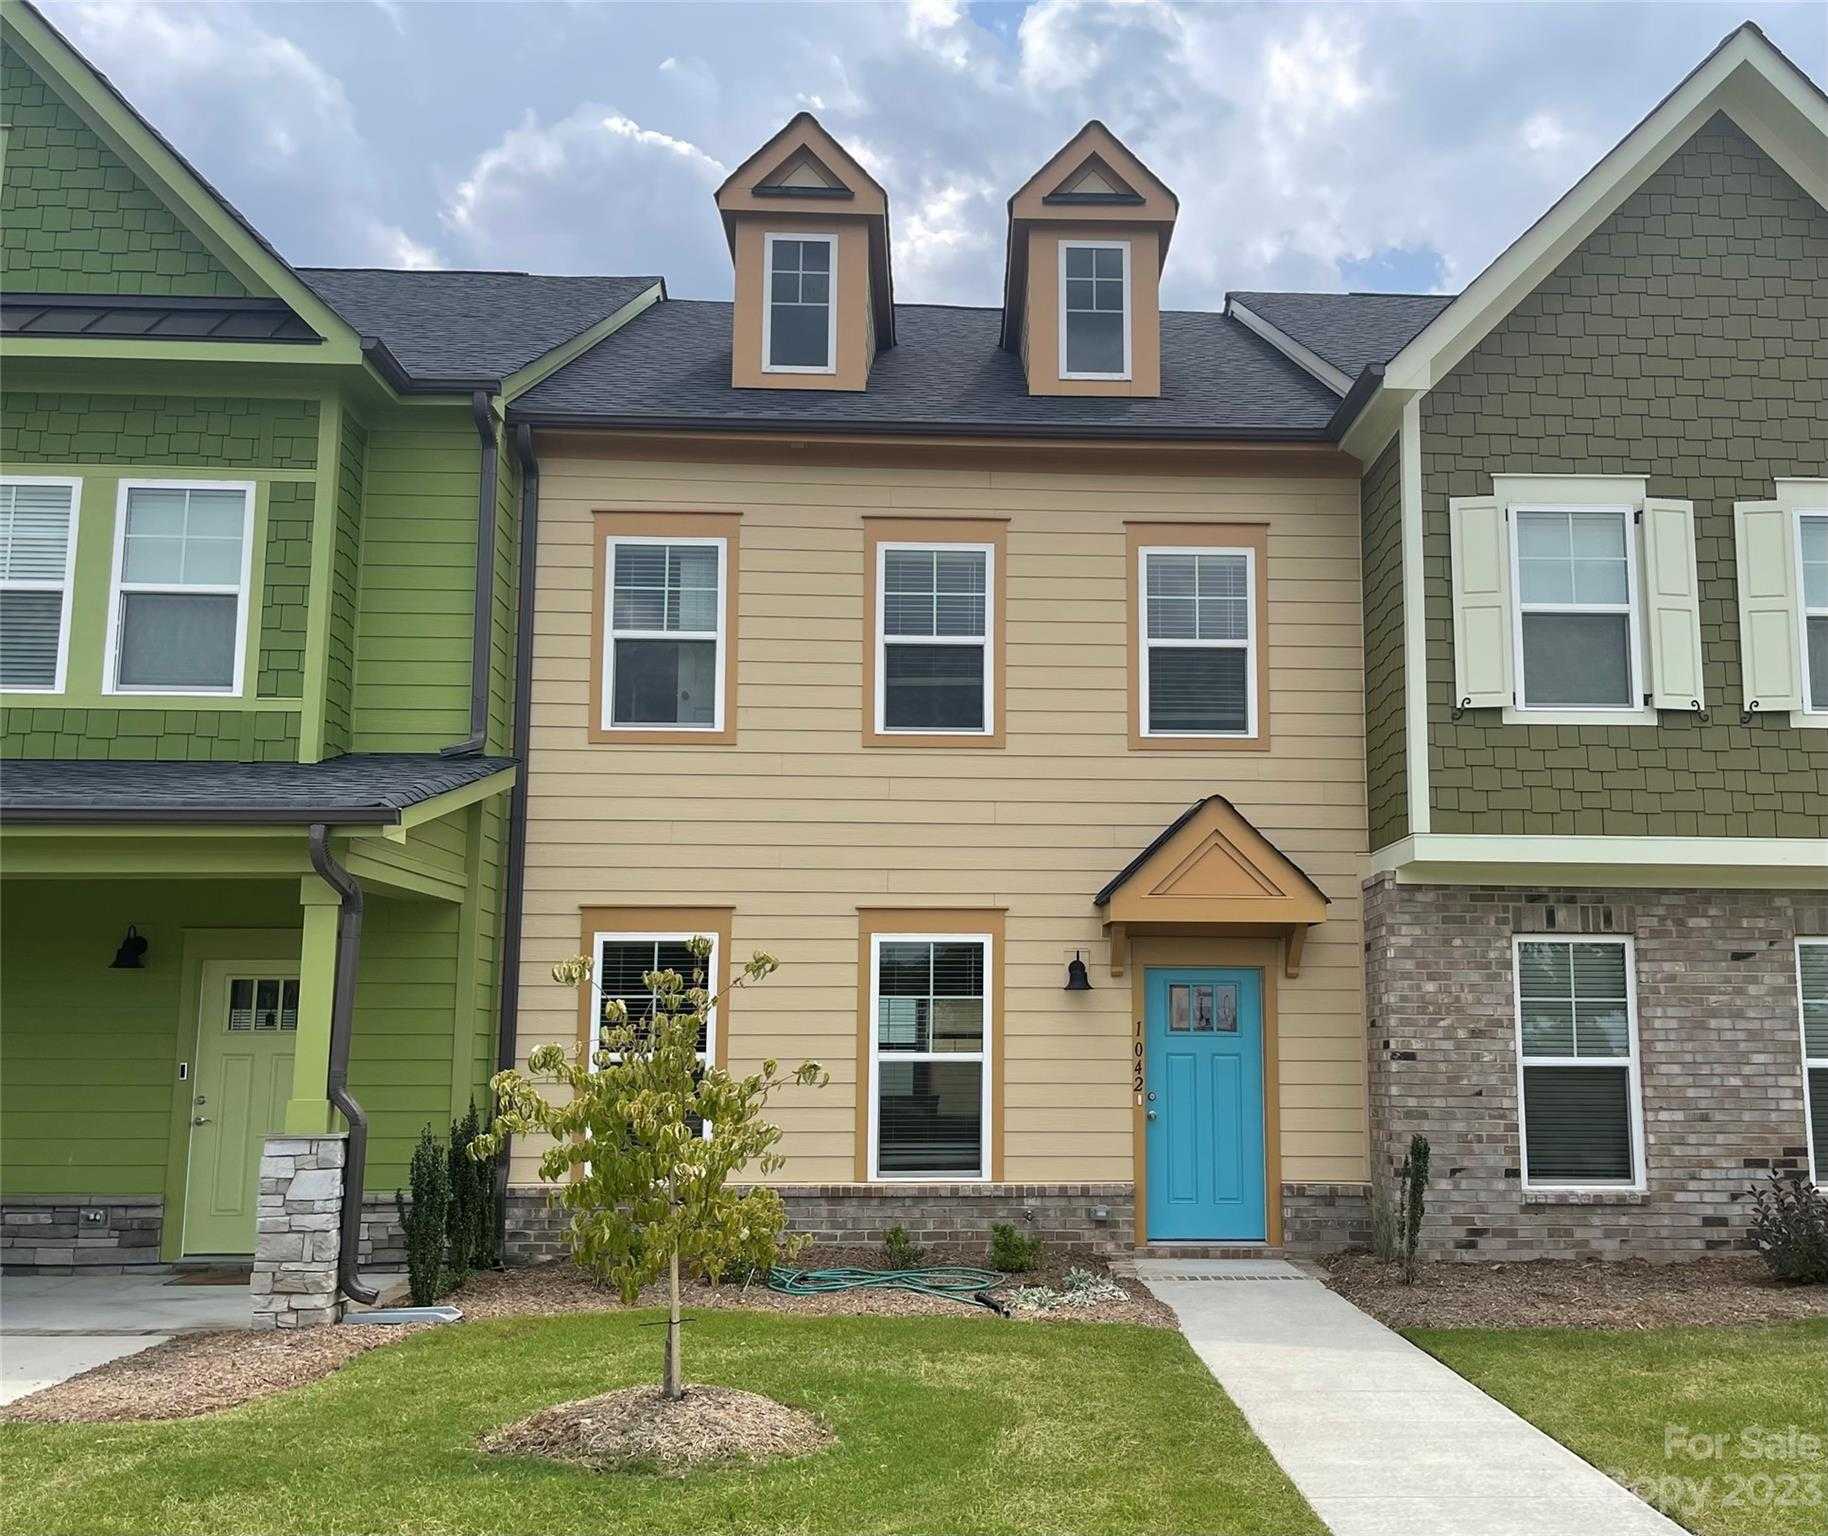 View Rock Hill, SC 29730 townhome